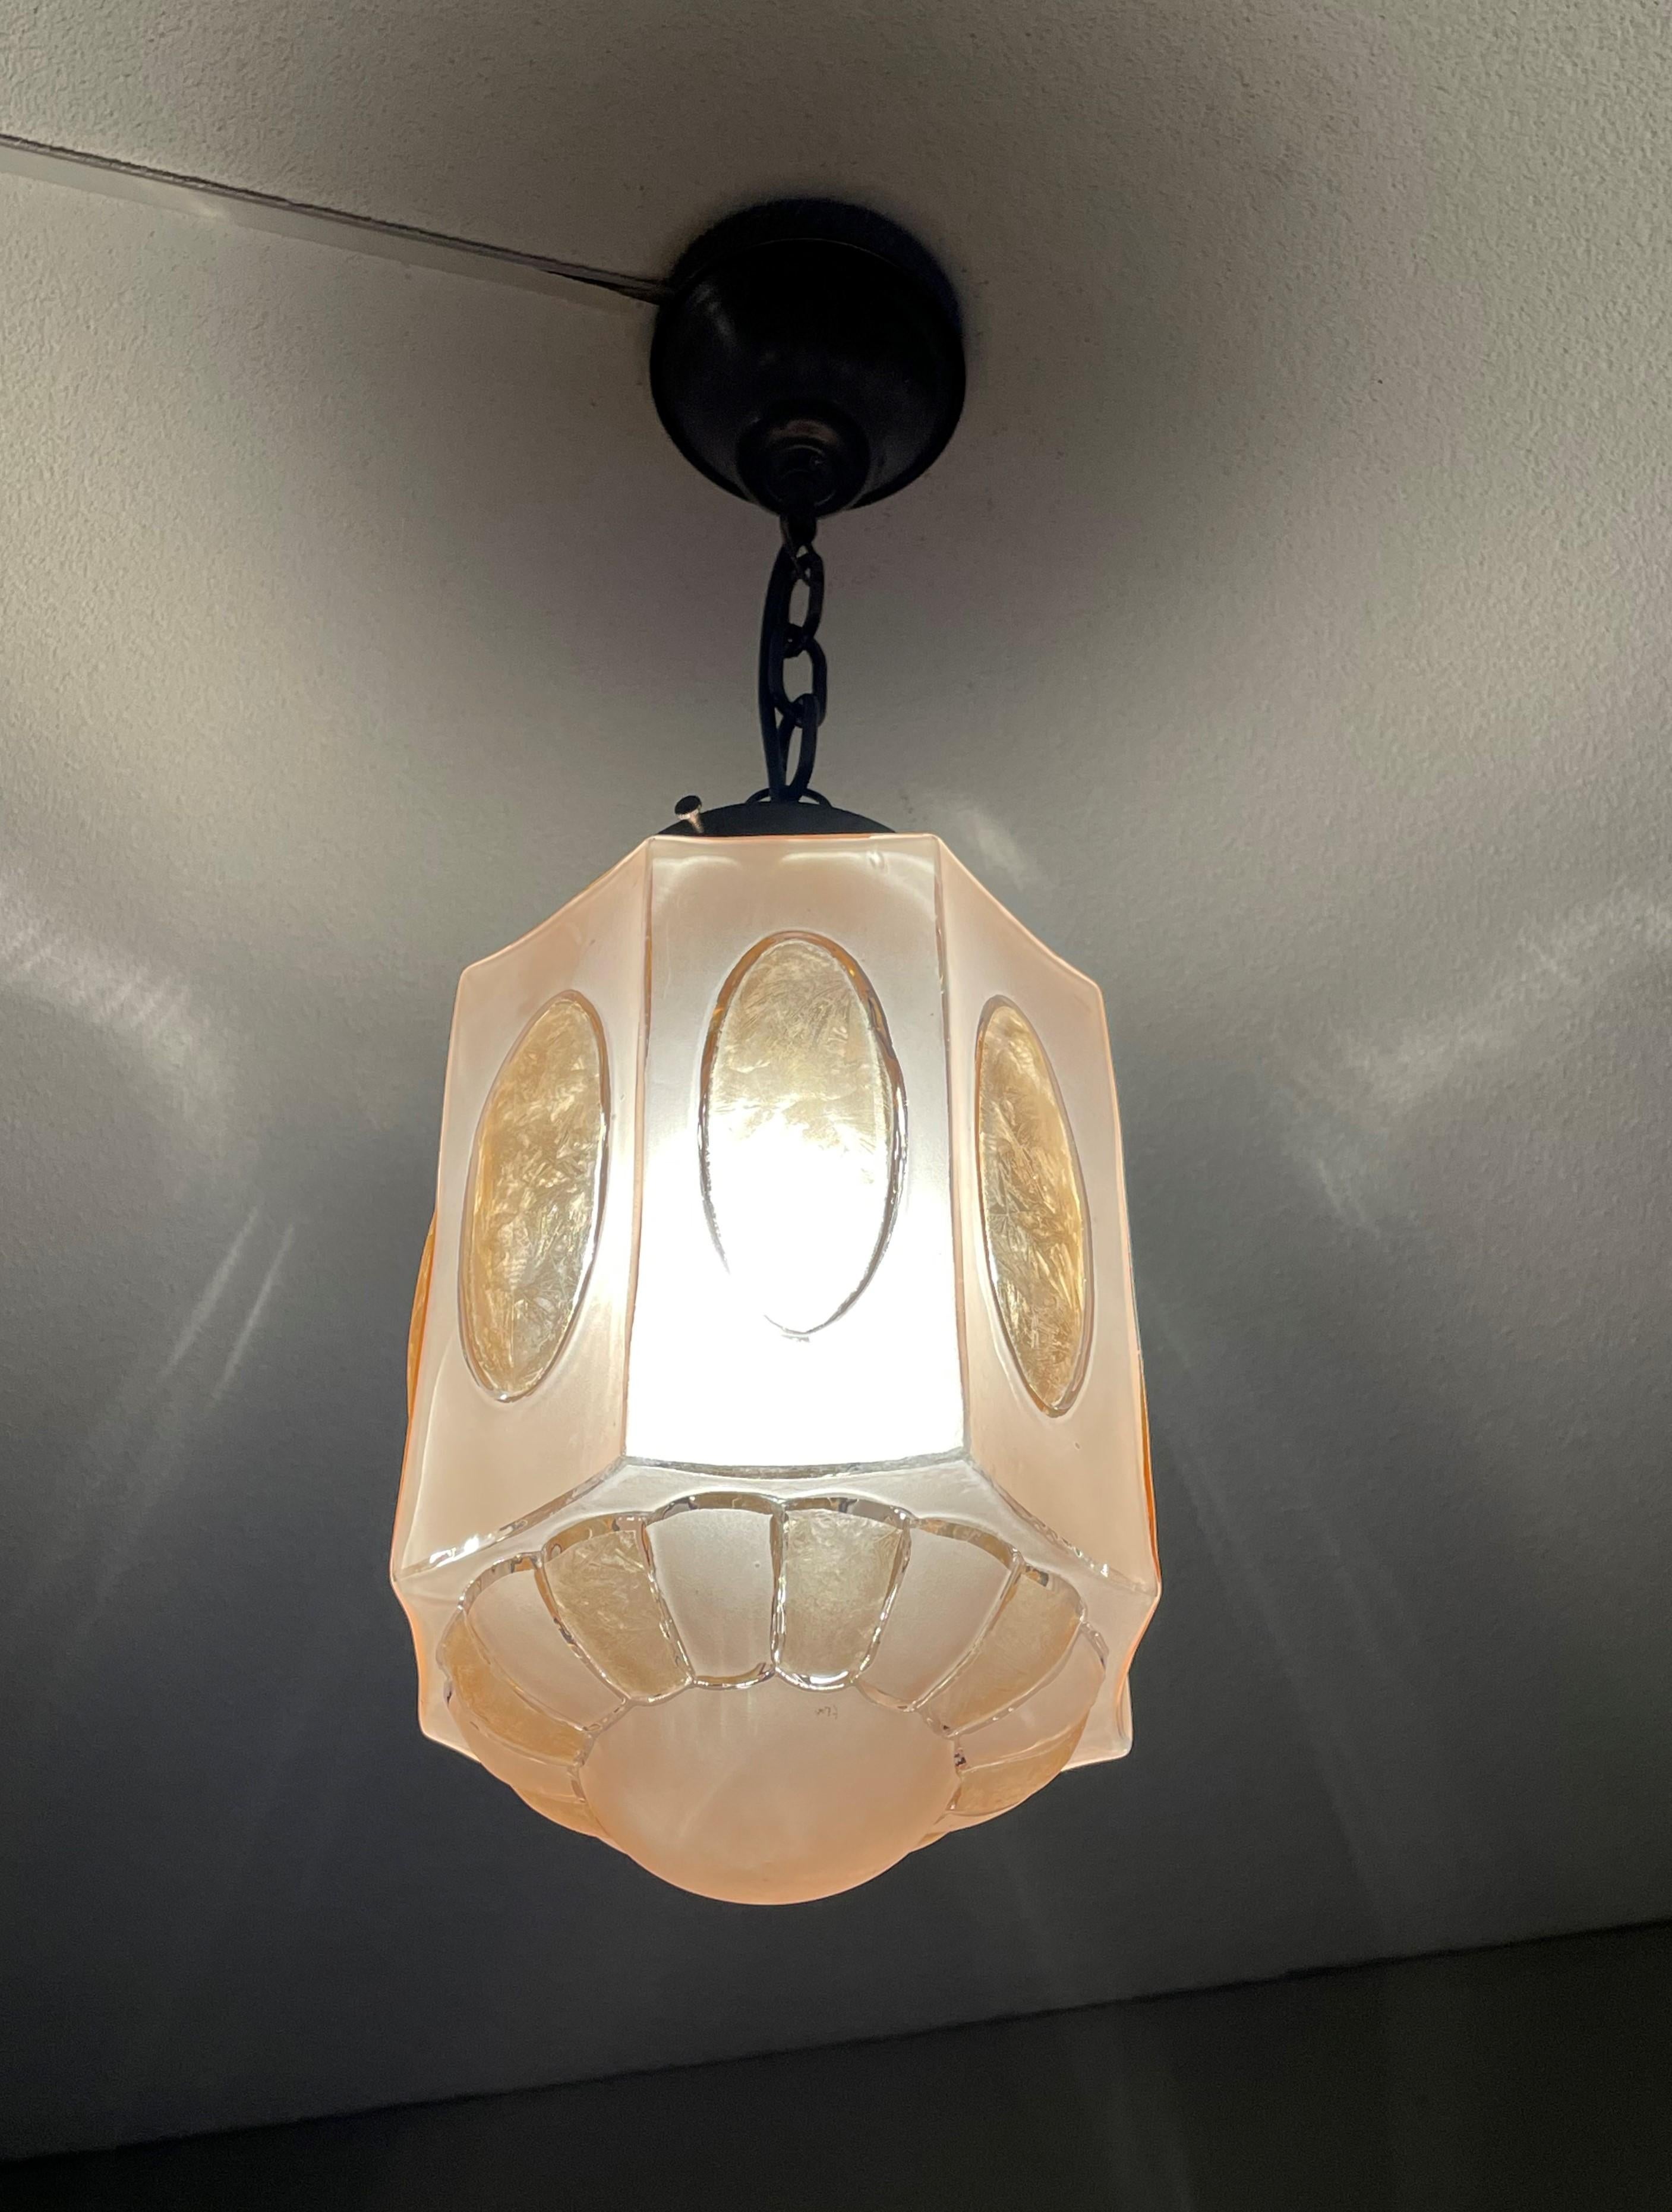 Rare Art Deco Pendant Light Fixture w. Octagonal Satinated & Frosted Glass Shade For Sale 8